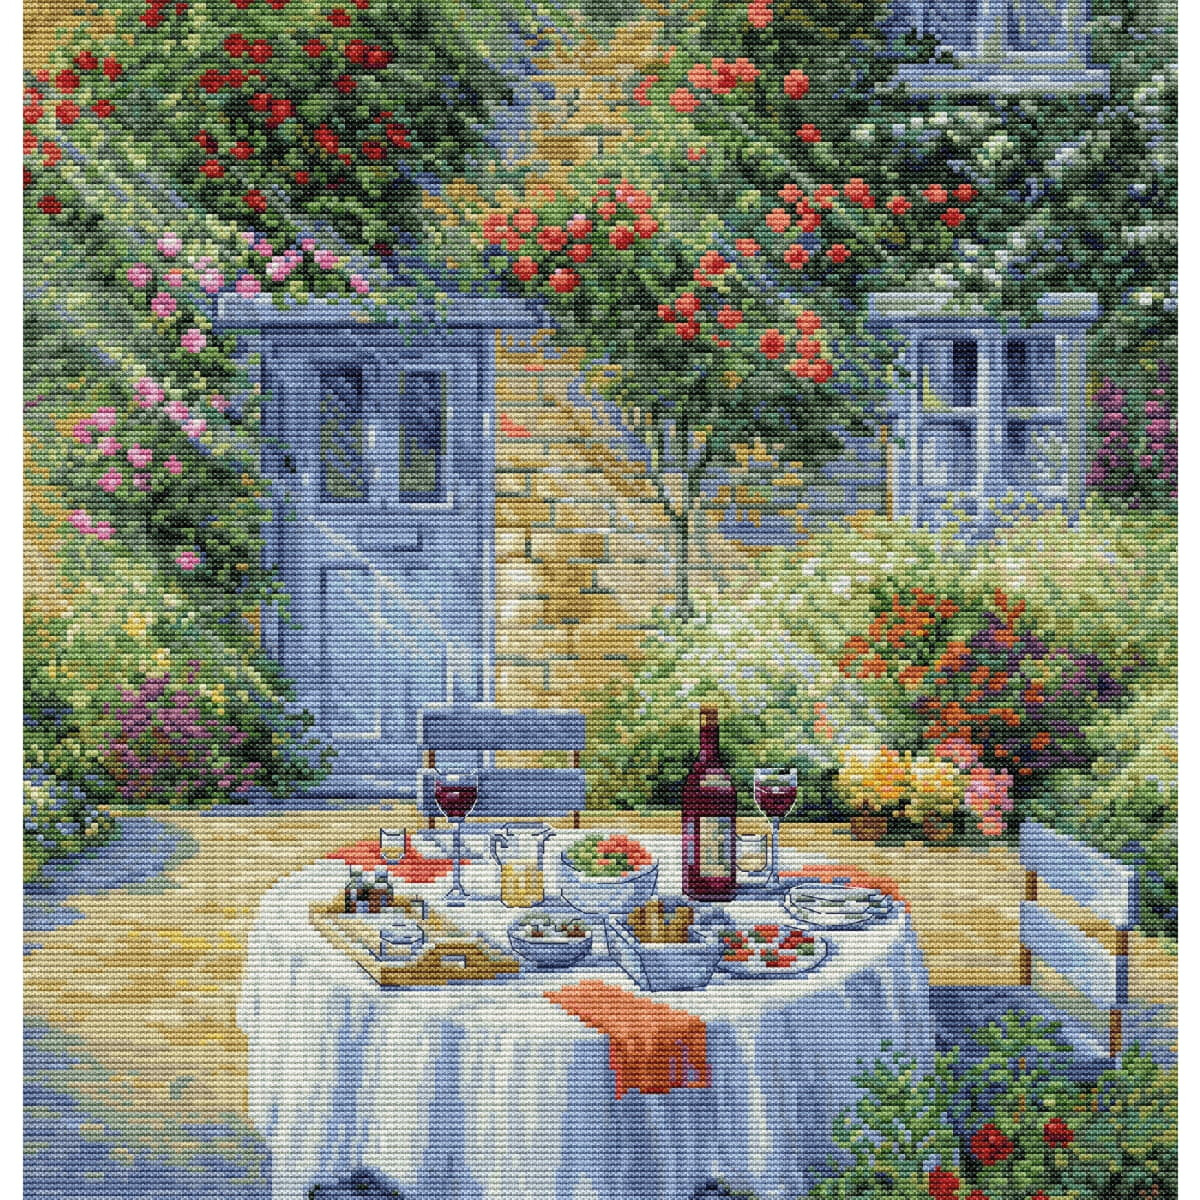 A picturesque scene with an outdoor table set for a meal,...